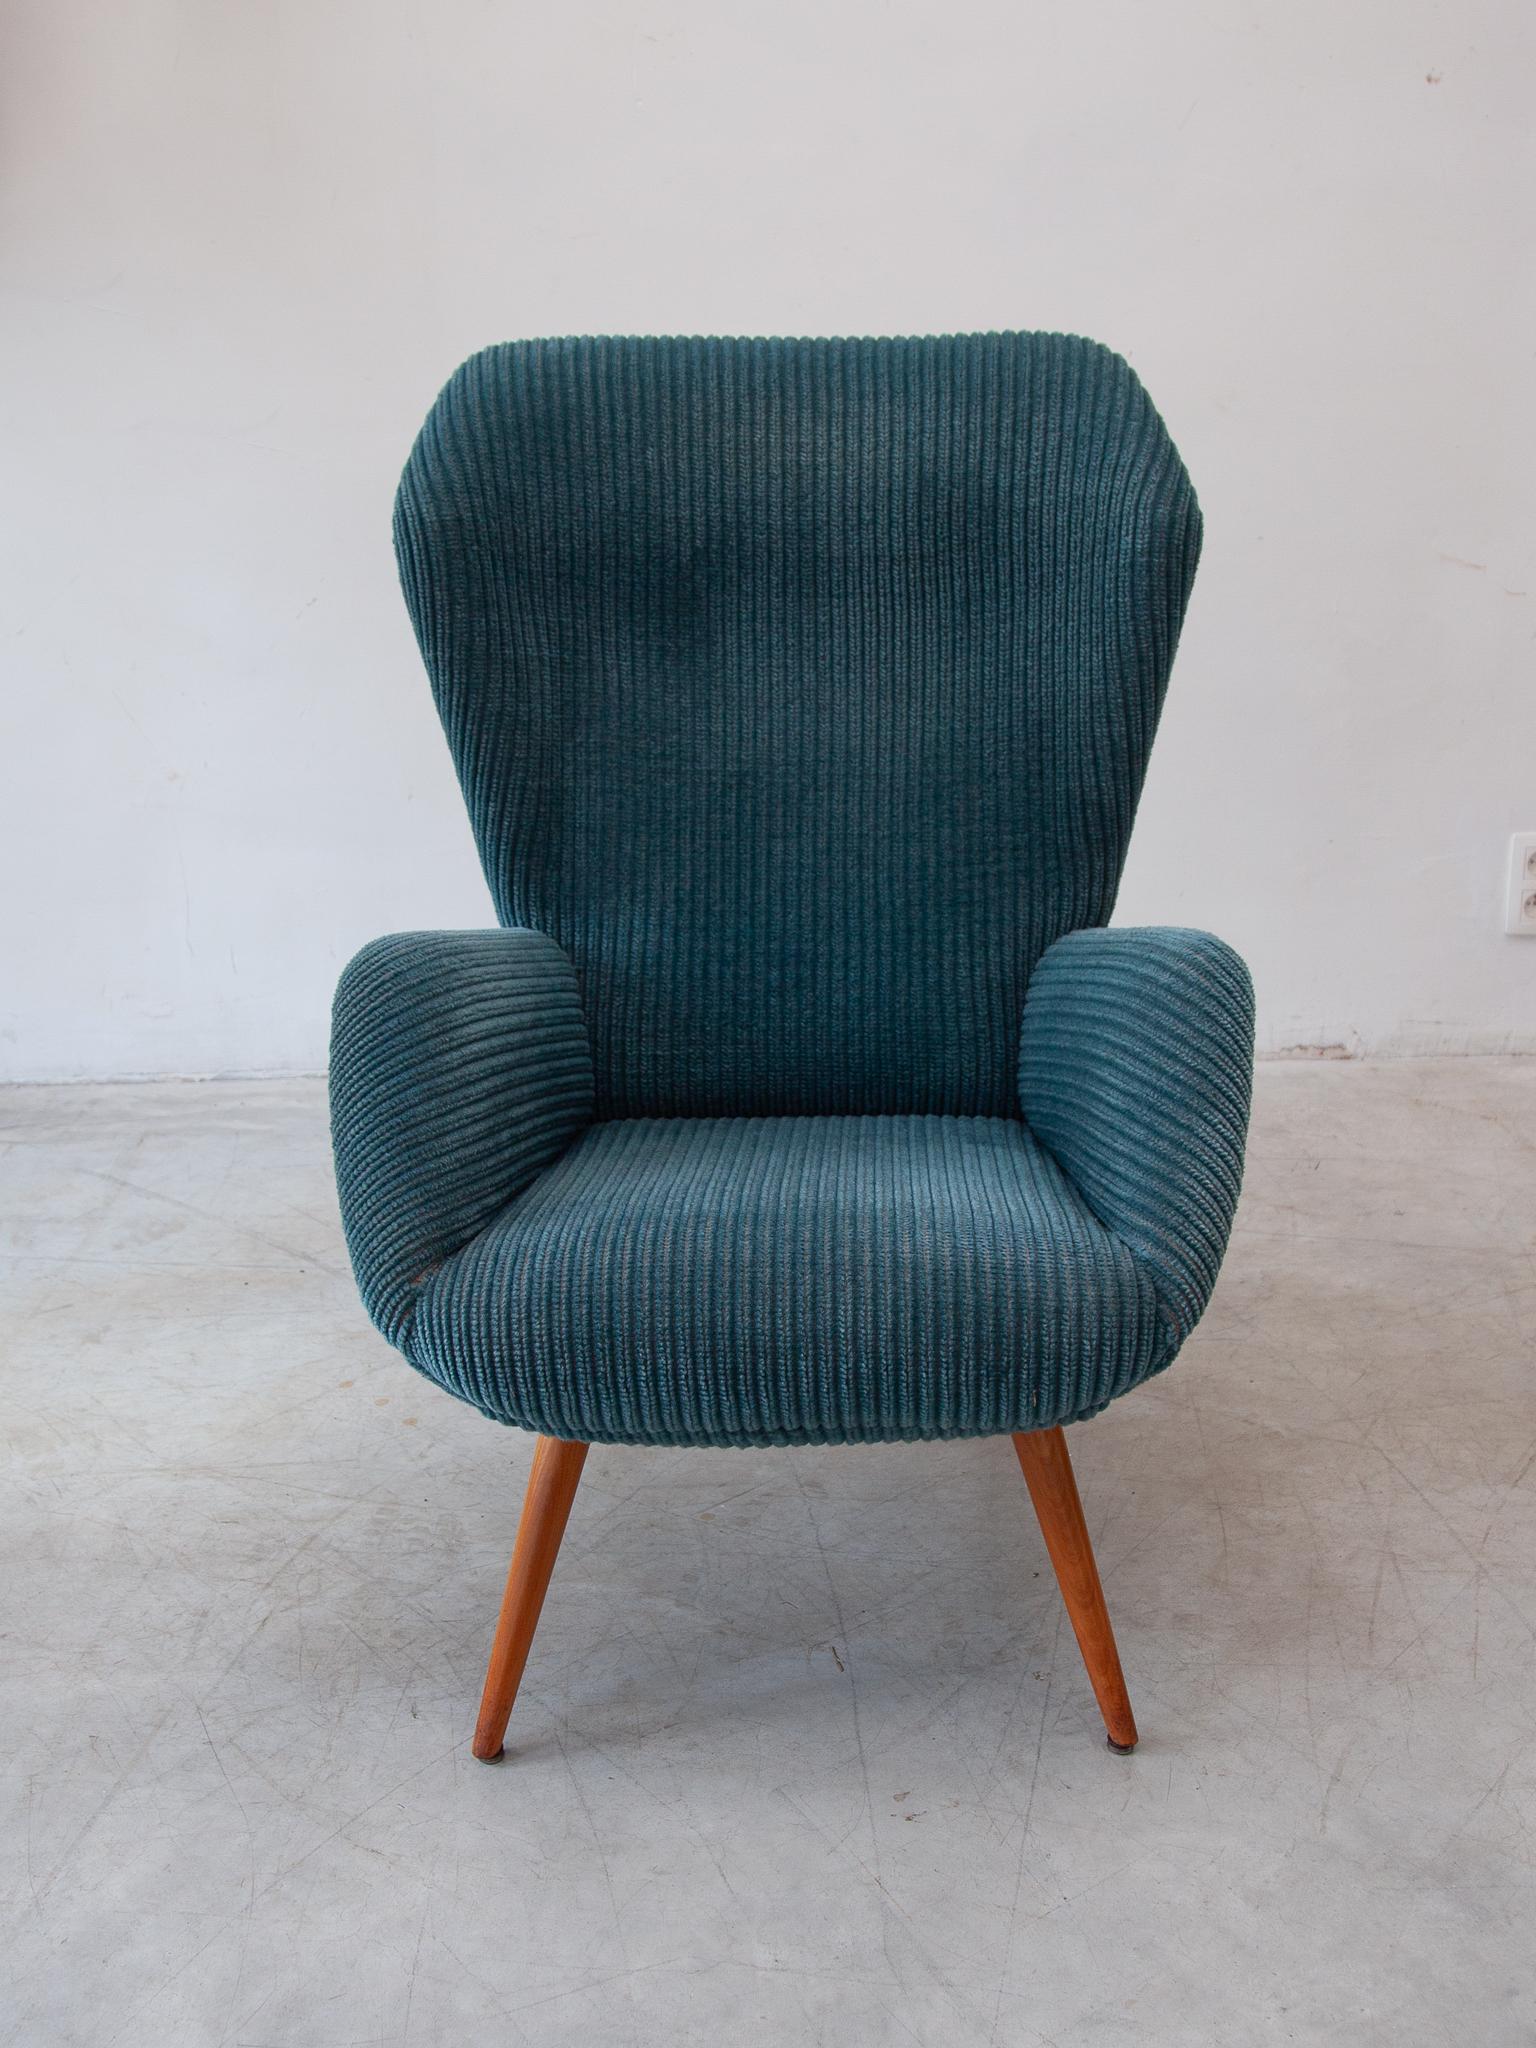 Mid-Century Modern High Wingback Lounge Chair, Germany designed by Ernst Jahn, 1950s For Sale